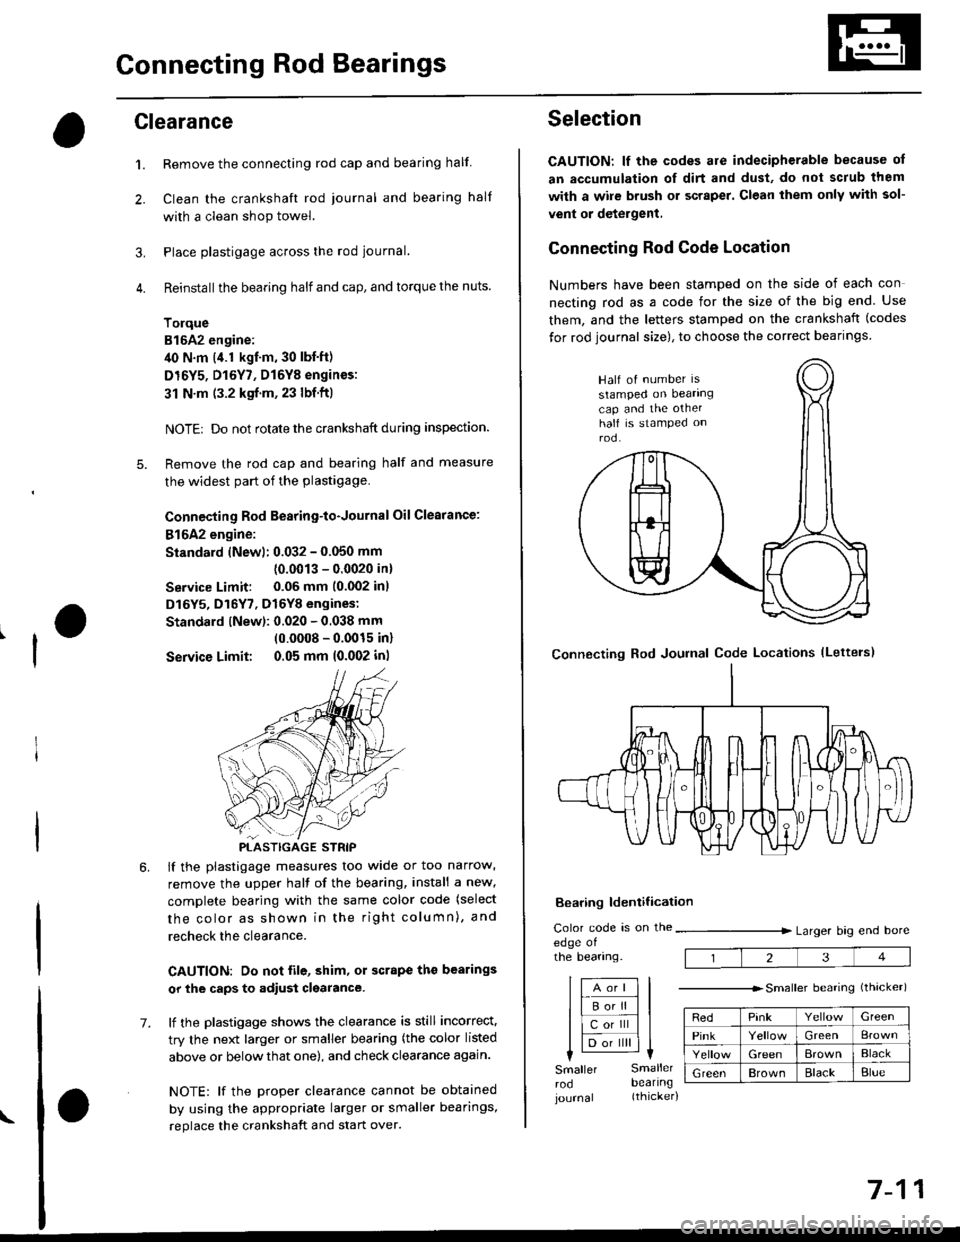 HONDA CIVIC 1996 6.G User Guide Connecting Rod Bearings
Clearance
Remove the connecting rod cap and bearing half
Clean the crankshaft rod iournal and bearing half
with a clean shop towel.
Place plastigage across the rod journal.
Rei